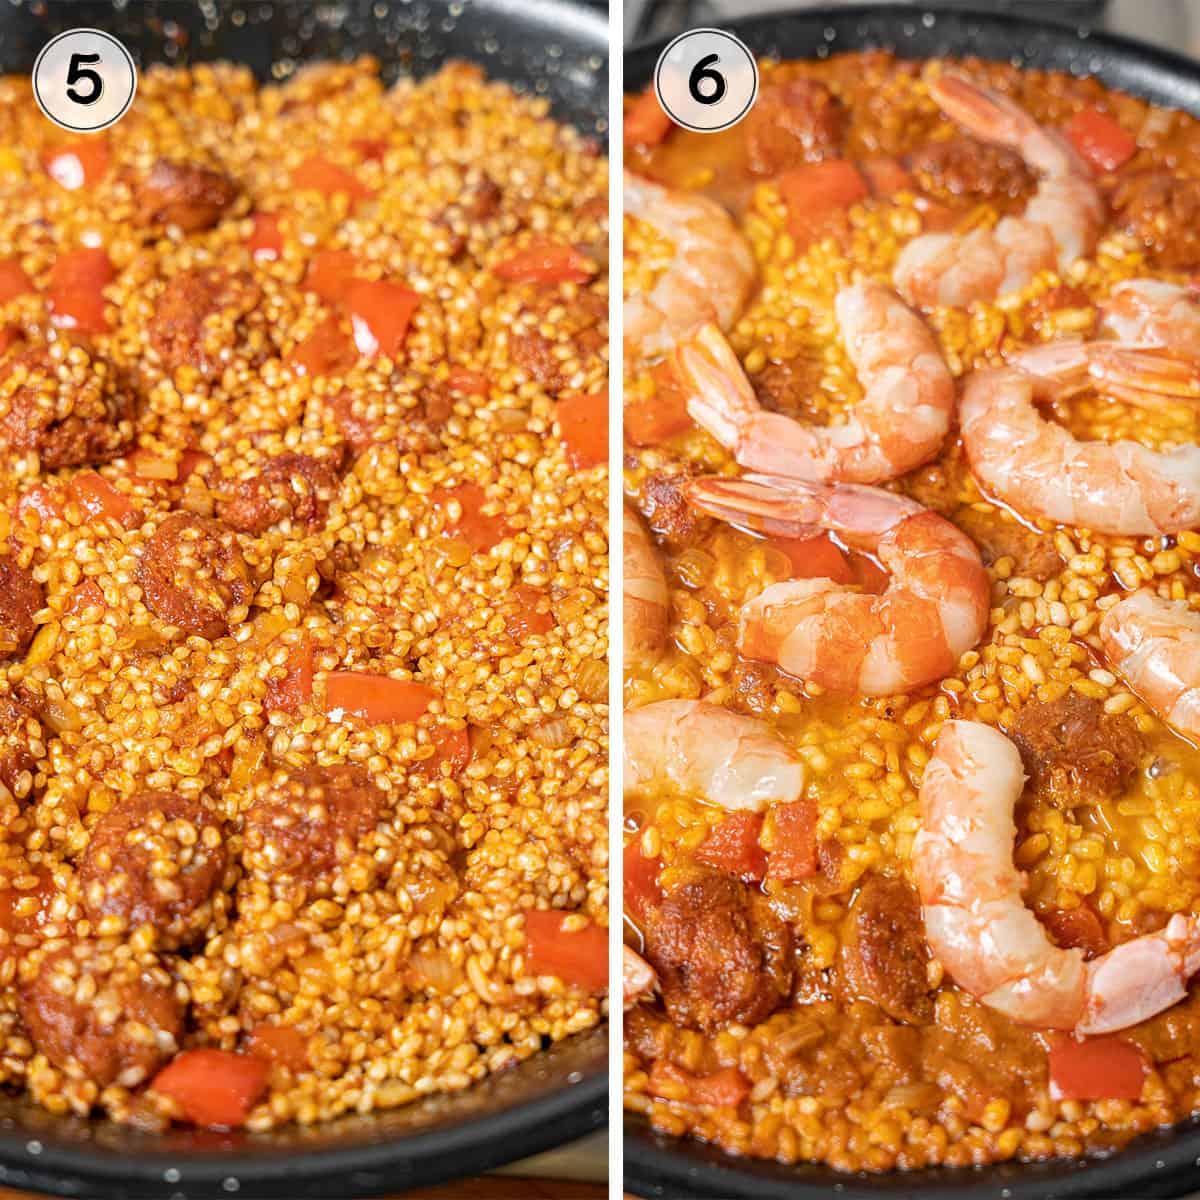 cooking the paella and adding the shrimp.